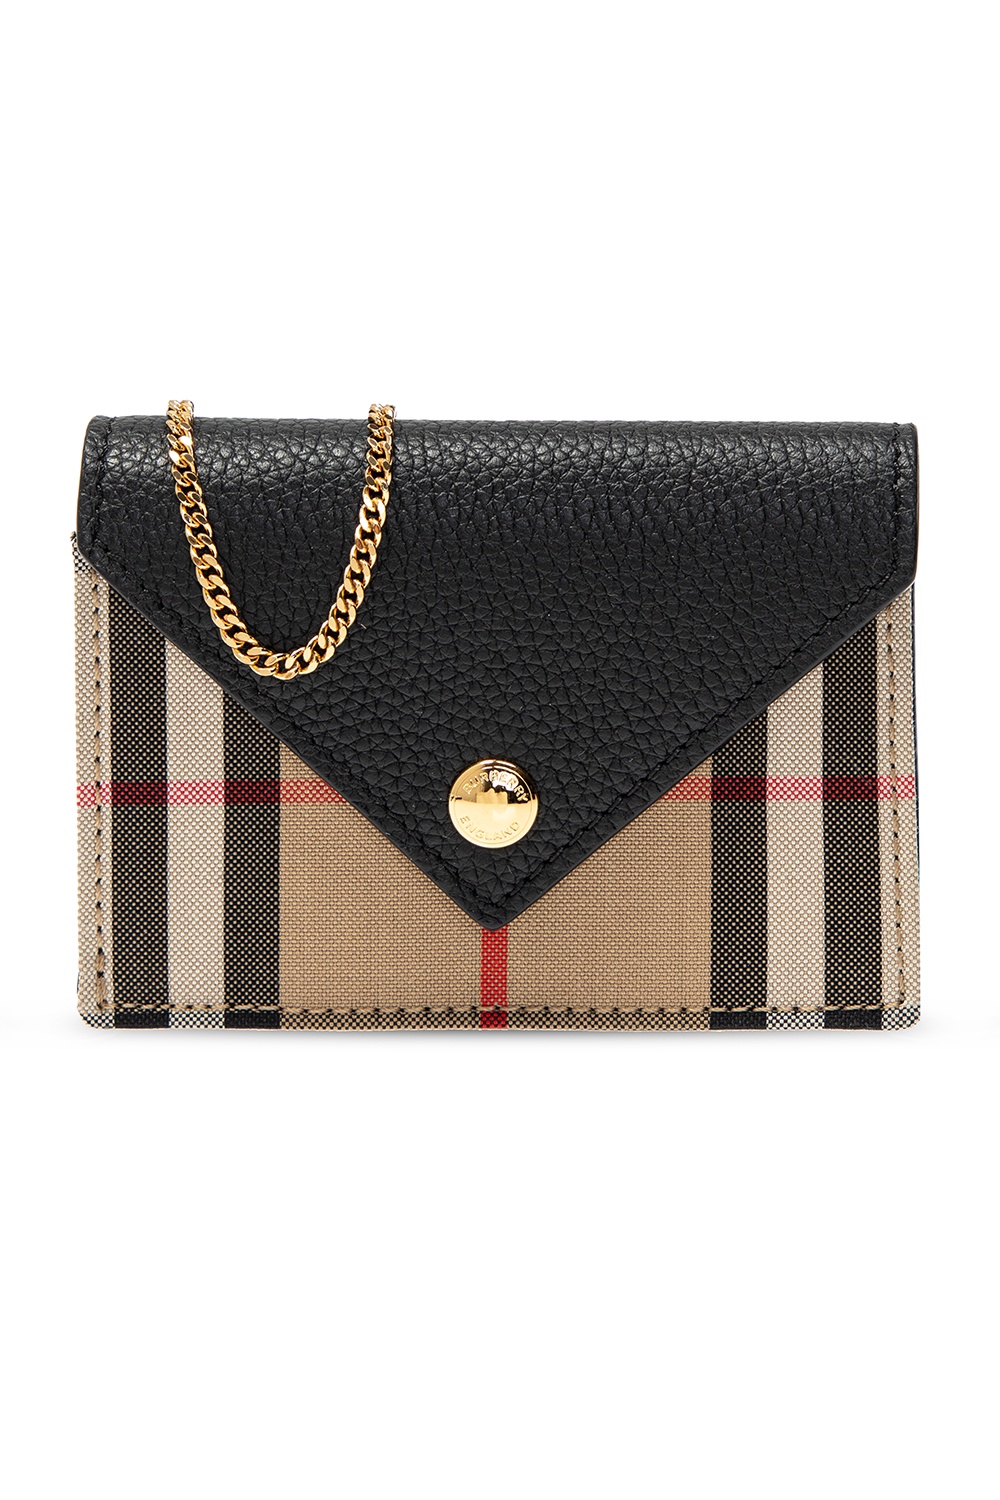 Burberry Card holder with logo, Women's Accessories